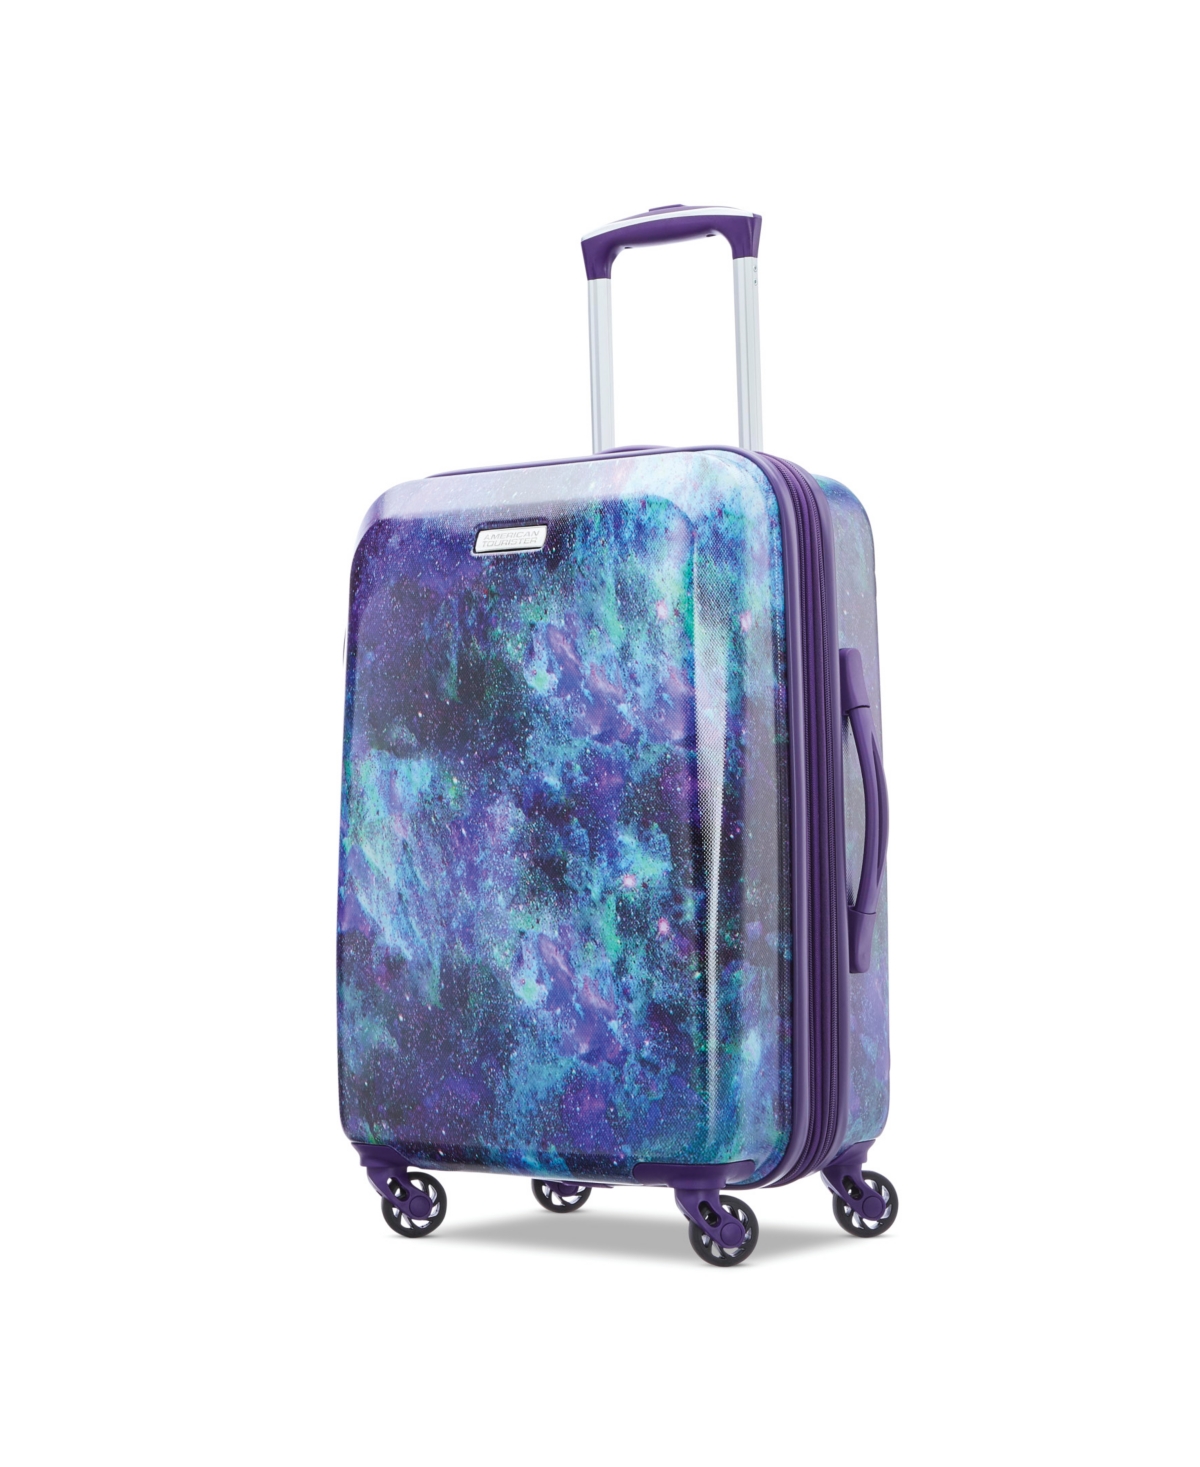 Moonlight 21" Hardside Expandable Carry-On Spinner Suitcase - Cosmos